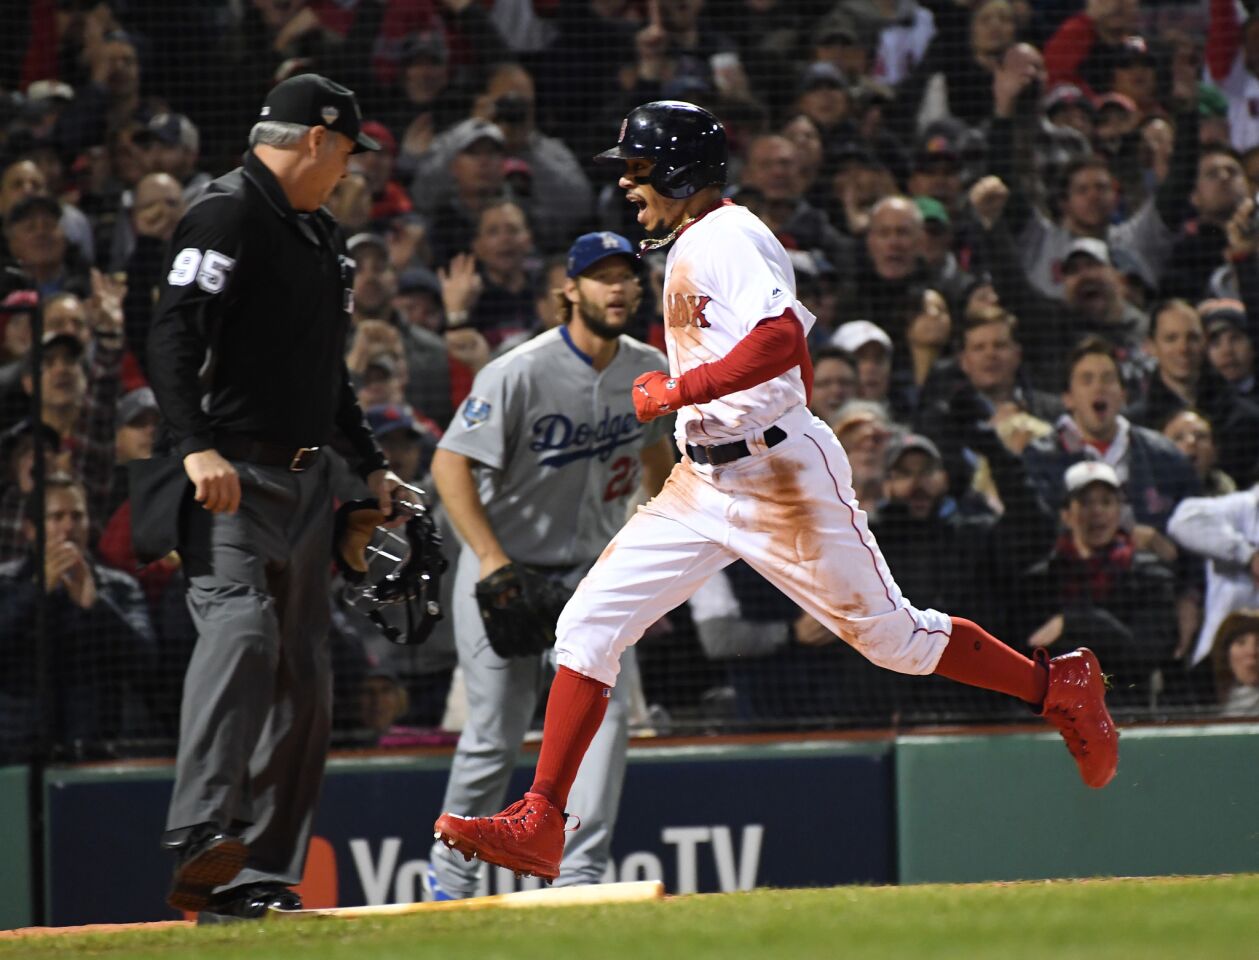 As Dodgers pitcher Clayton Kershaw watches, Red Sox's Mookie Betts scores the first run in the first inning of game one.